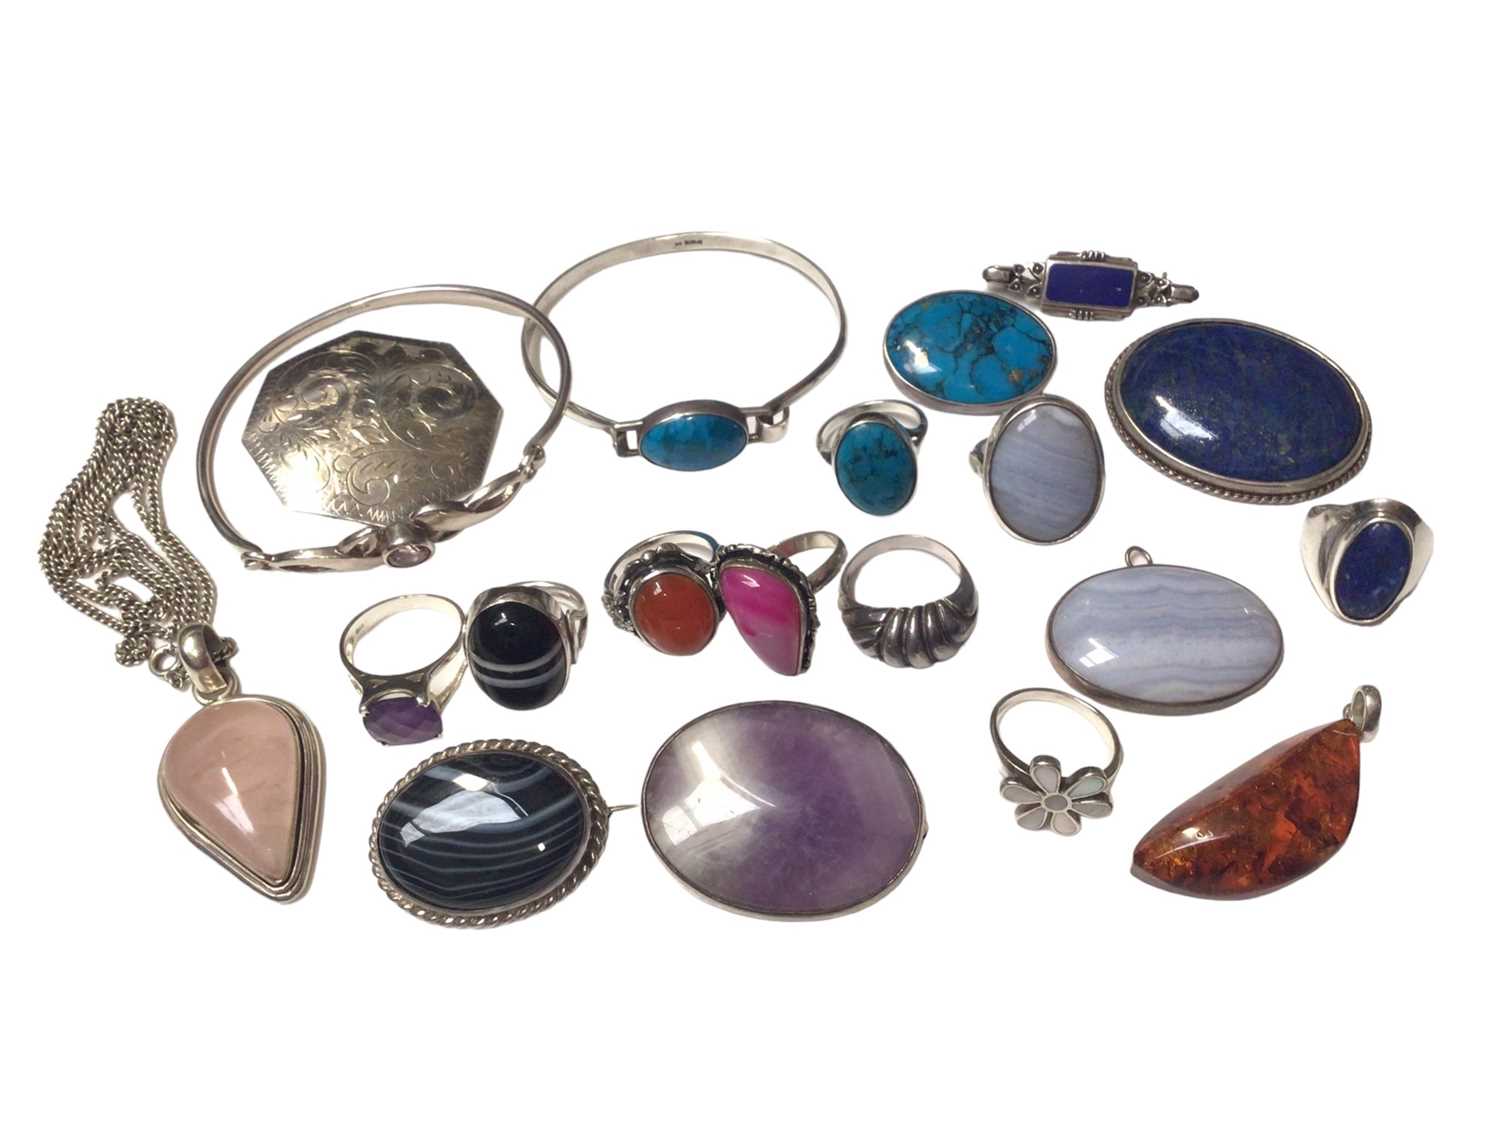 Group of silver and white metal jewellery set with semi-precious gemstones